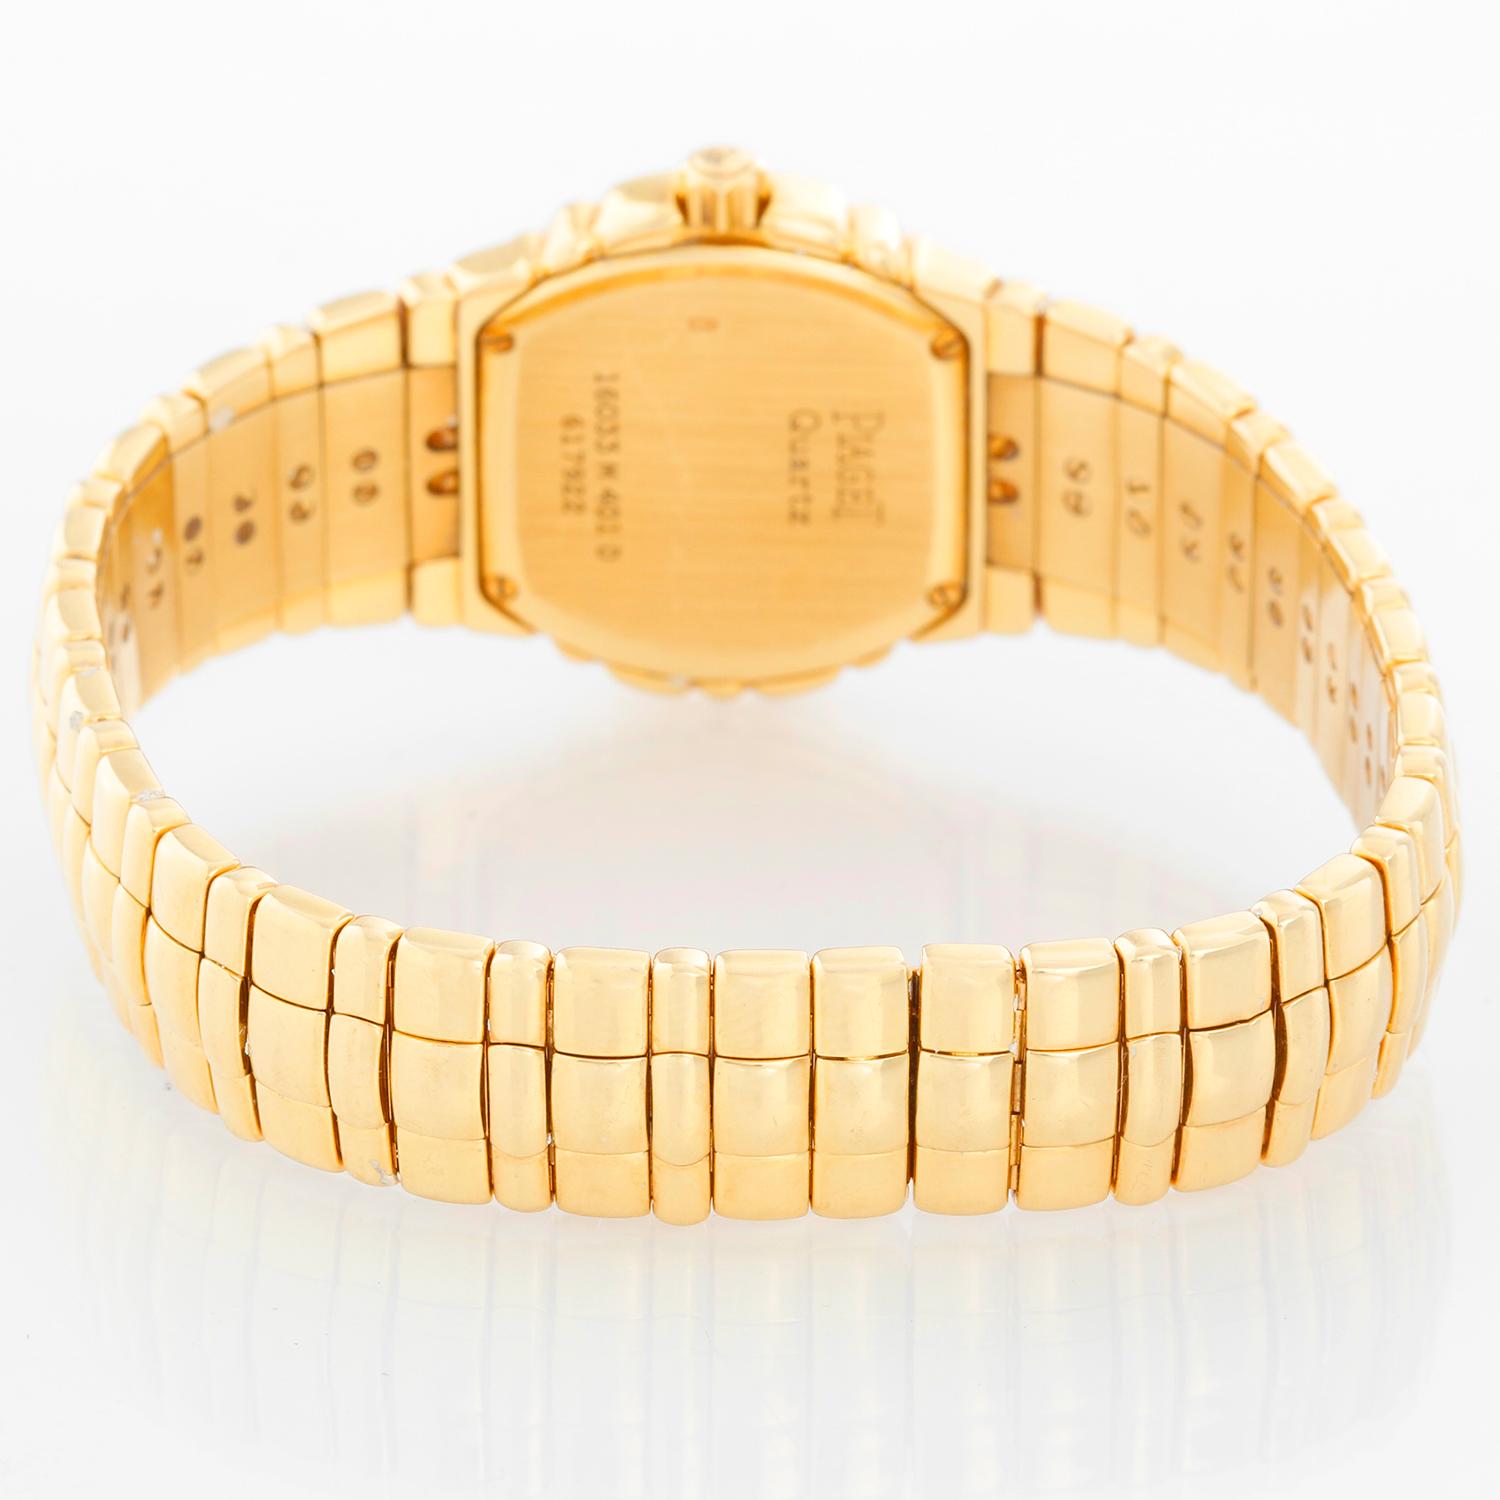 Ladies Piaget Tanagra 18K Yellow Gold Watch In Excellent Condition For Sale In Dallas, TX